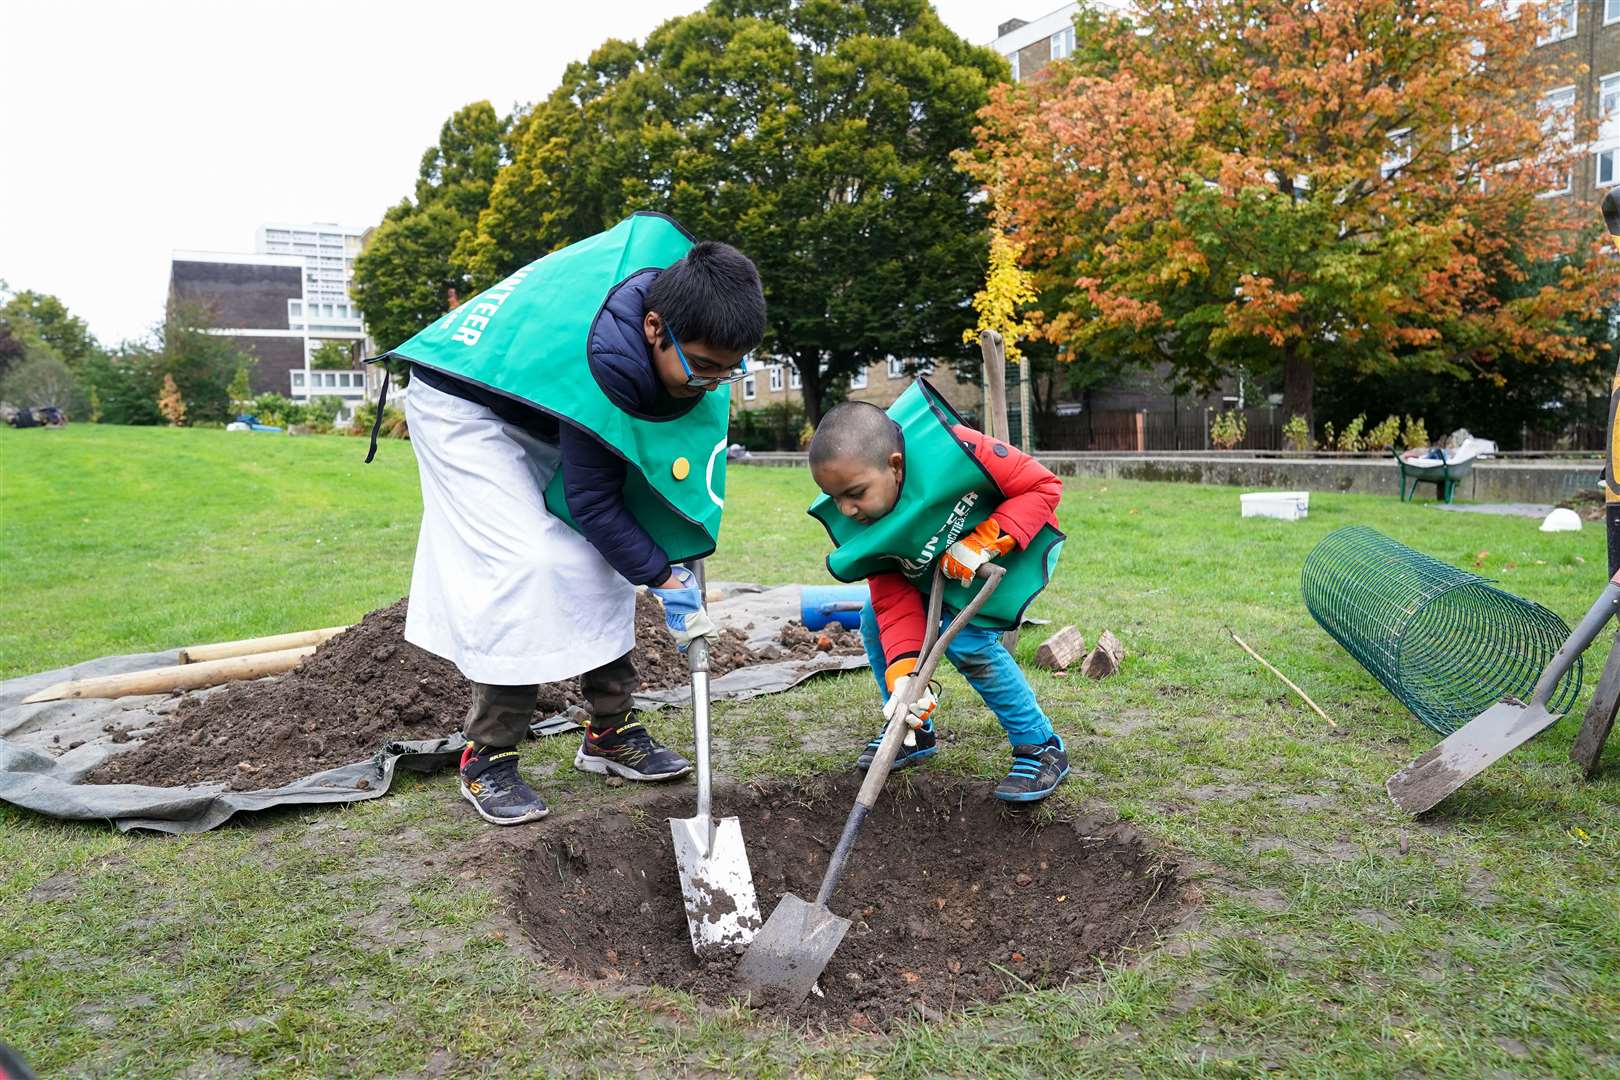 Ahmed Khan, eight, (left) and his brother Ammar Khan, four, help plant a tree (Kirsty O’Connor/PA)